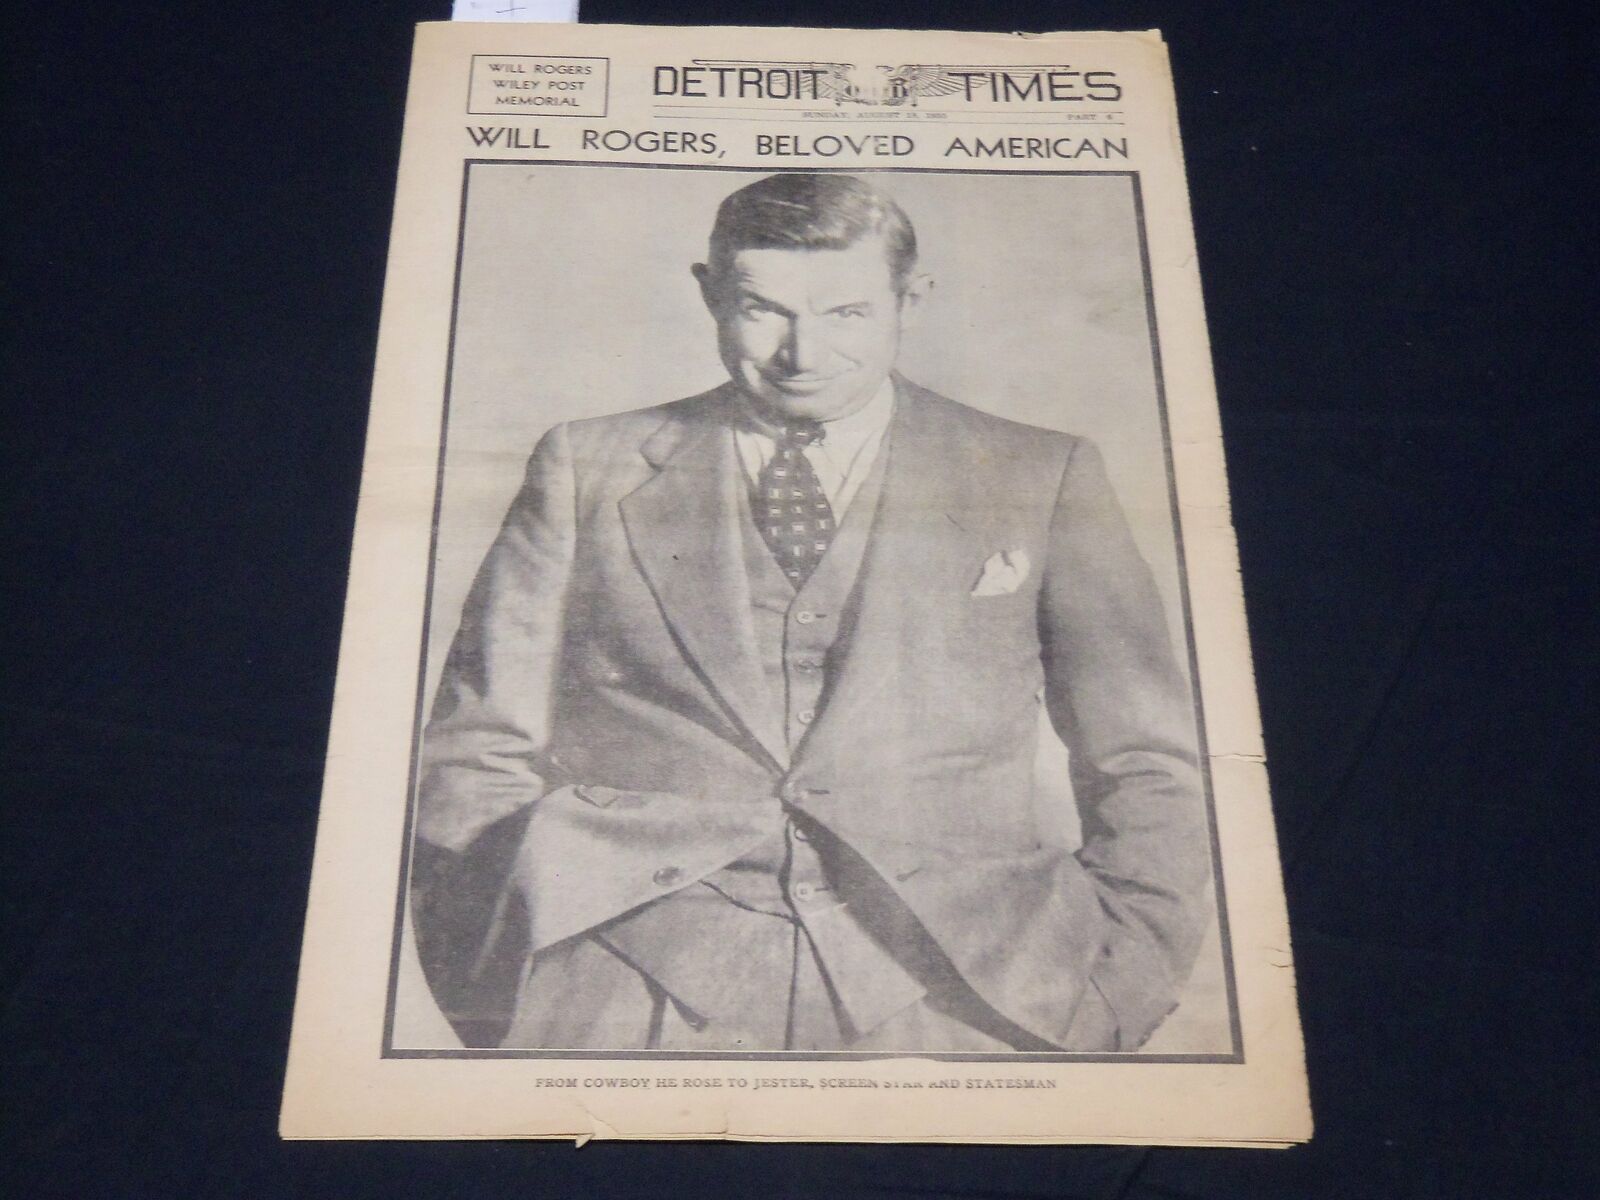 1935 AUGUST 18 DETROIT TIMES NEWSPAPER - WILL ROGERS, BELOVED AMERICAN - NP 4512